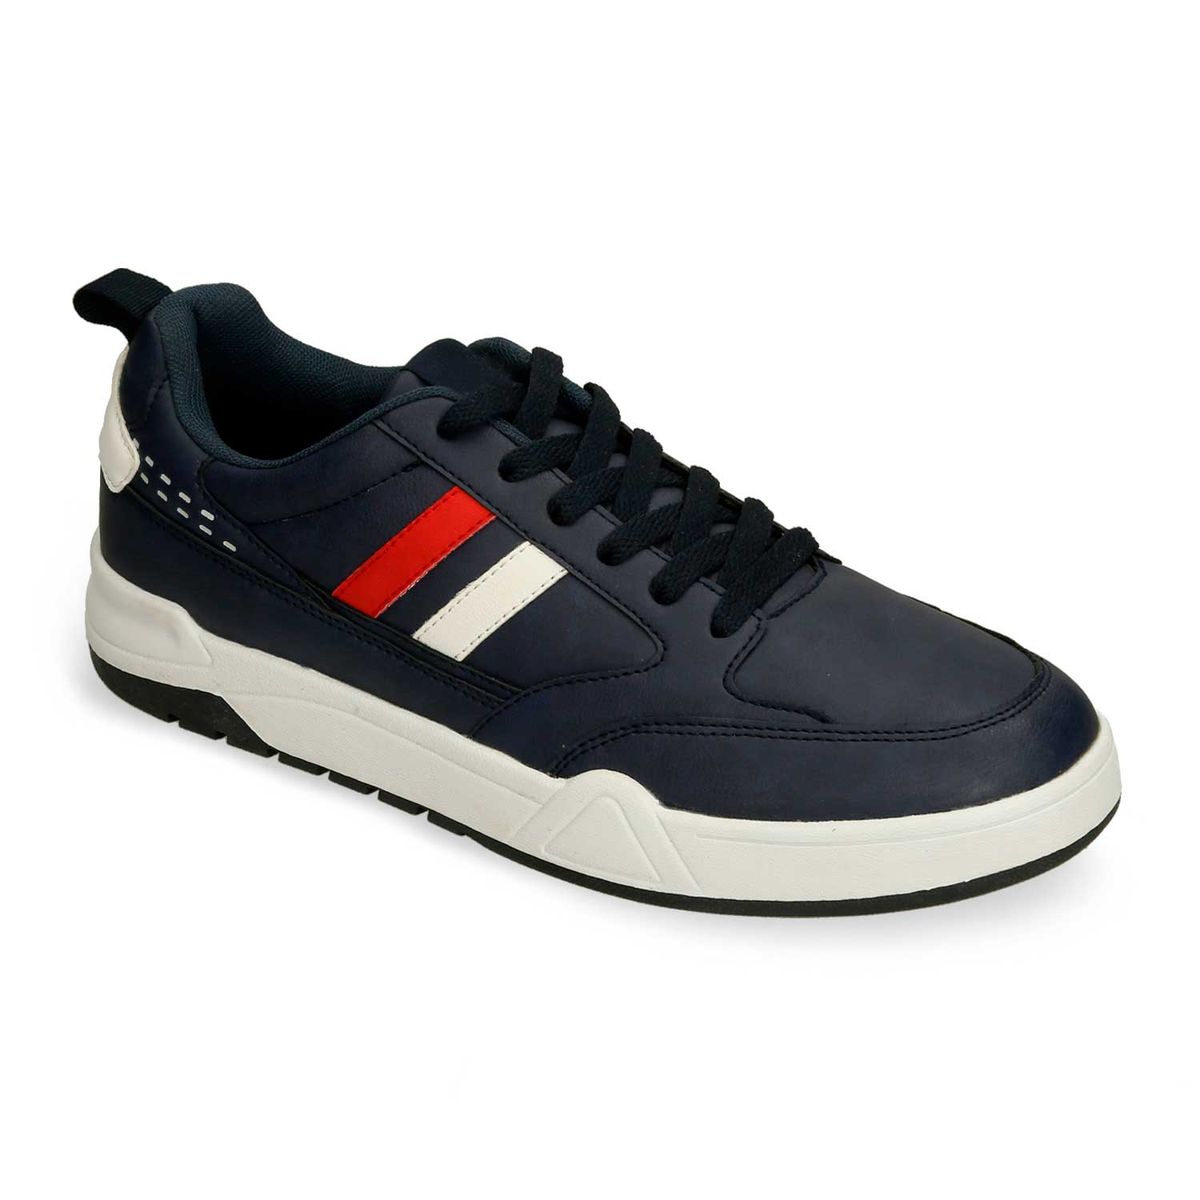 Tenis Casuales Azul North Star Grover Jake Hombre